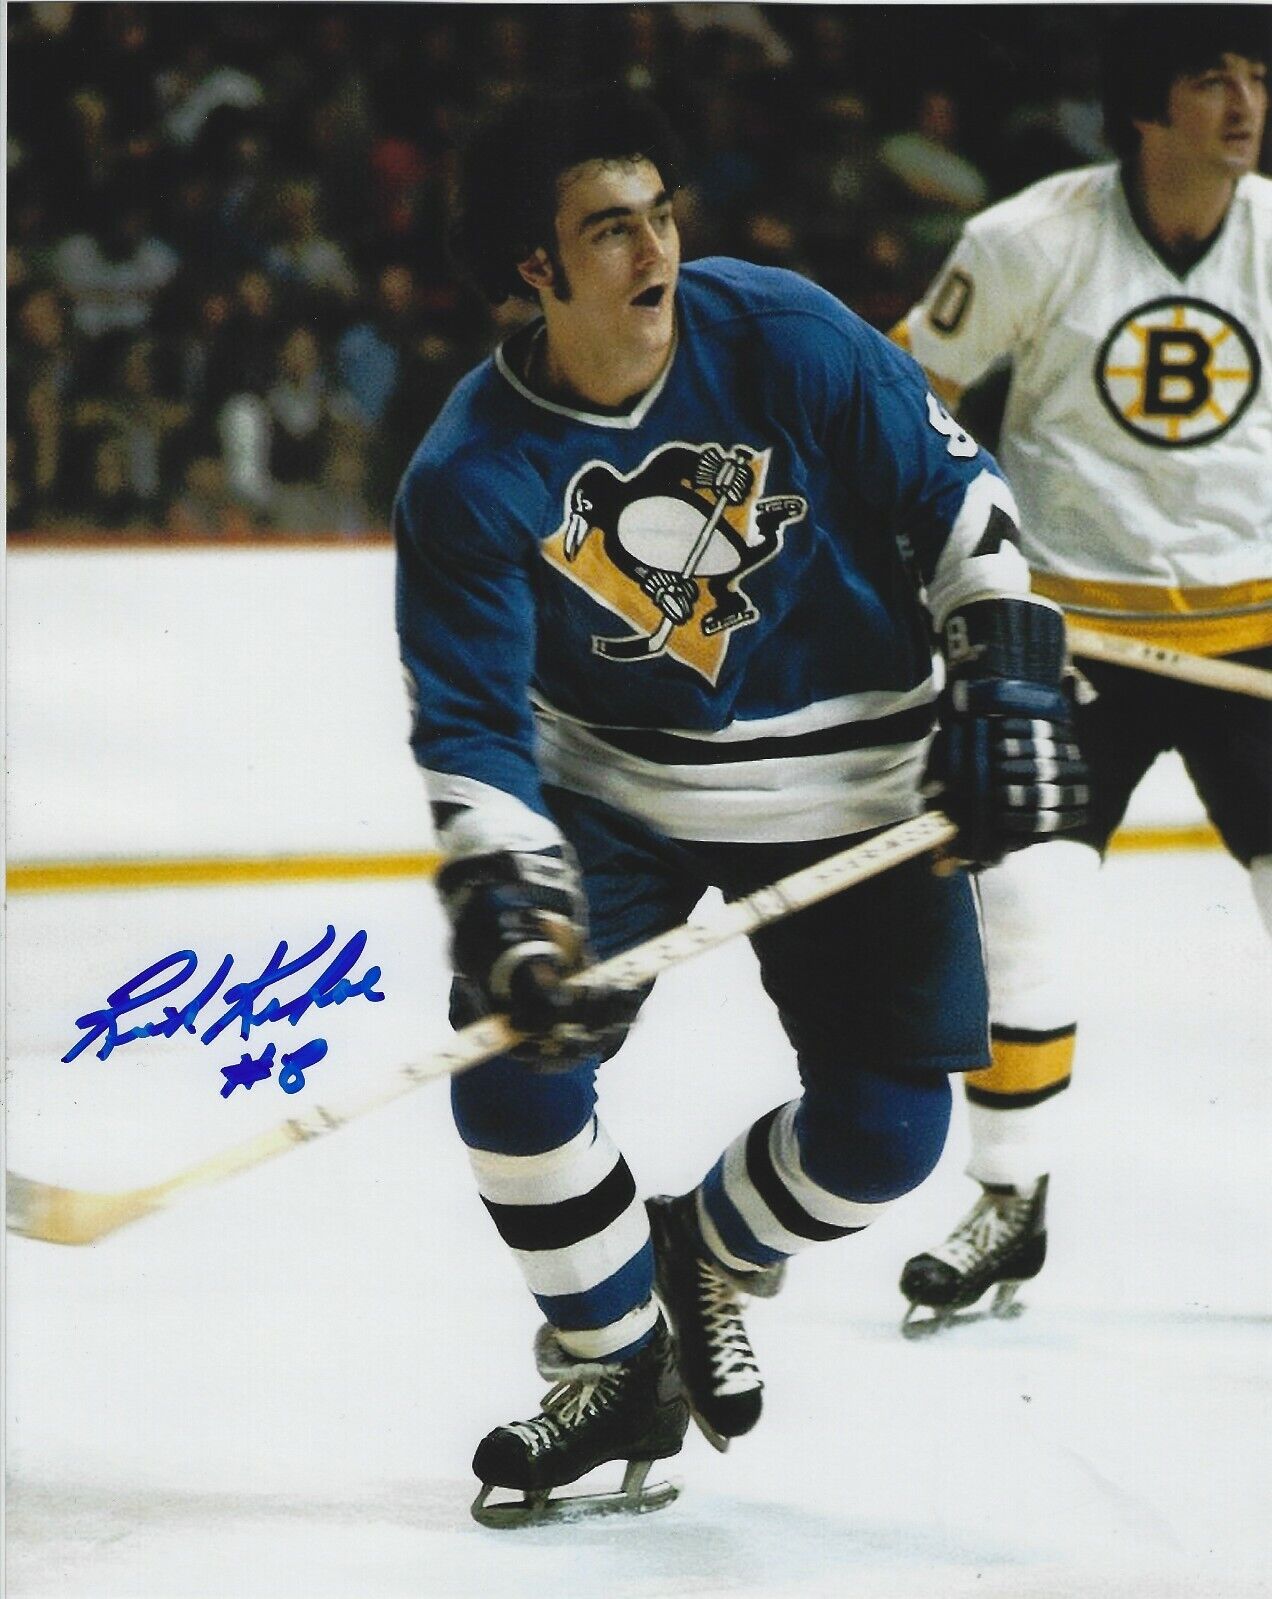 Autographed 8x10 RICK KEHOE Pittsburgh Penguins Photo Poster painting w/Show Ticket